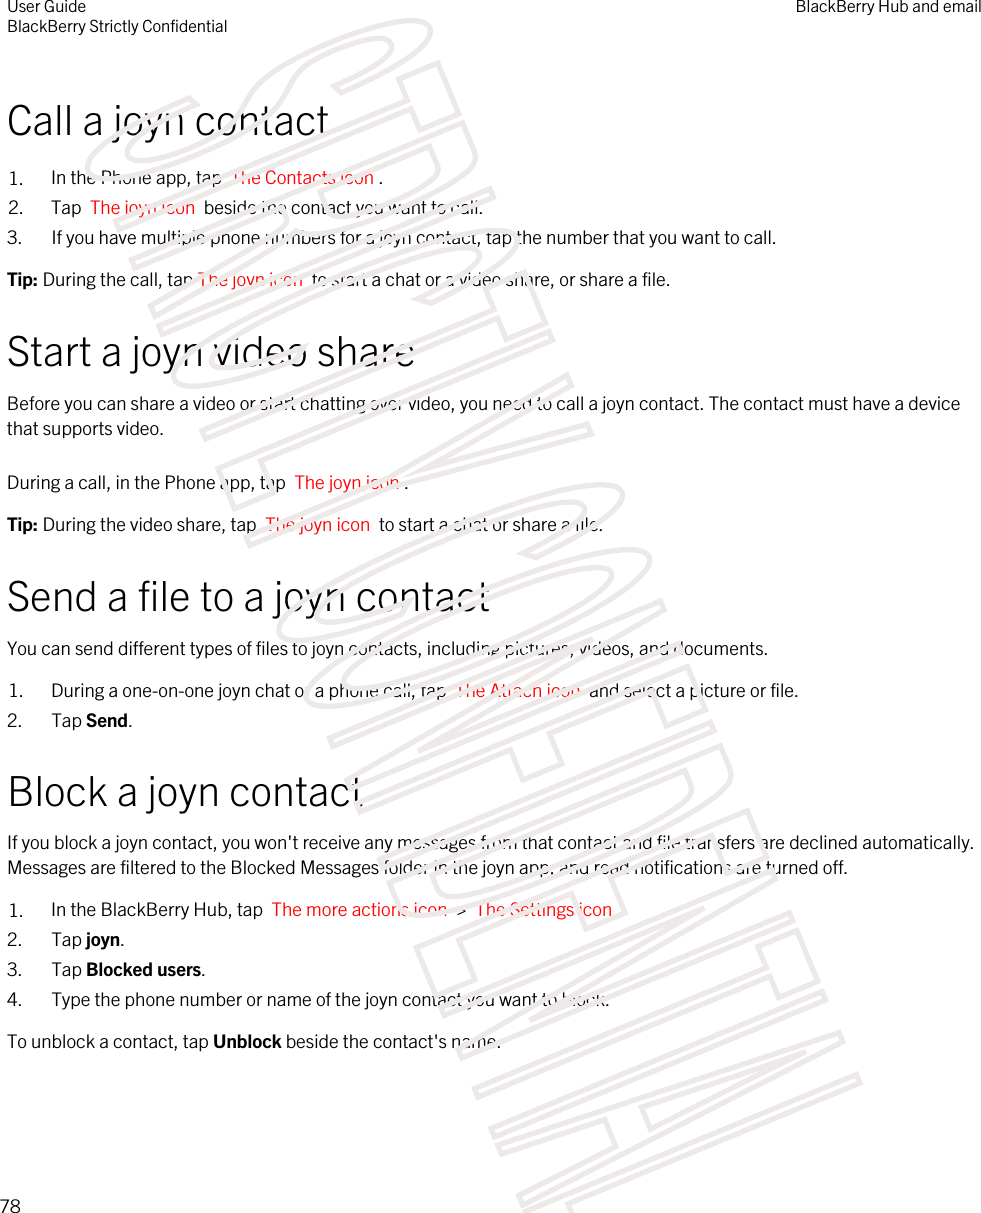 Call a joyn contact1. In the Phone app, tap  The Contacts icon .2. Tap  The joyn icon  beside the contact you want to call.3. If you have multiple phone numbers for a joyn contact, tap the number that you want to call.Tip: During the call, tap The joyn icon  to start a chat or a video share, or share a file.Start a joyn video shareBefore you can share a video or start chatting over video, you need to call a joyn contact. The contact must have a device that supports video.During a call, in the Phone app, tap  The joyn icon . Tip: During the video share, tap  The joyn icon  to start a chat or share a file.Send a file to a joyn contactYou can send different types of files to joyn contacts, including pictures, videos, and documents.1. During a one-on-one joyn chat or a phone call, tap  The Attach icon  and select a picture or file.2. Tap Send.Block a joyn contactIf you block a joyn contact, you won&apos;t receive any messages from that contact and file transfers are declined automatically. Messages are filtered to the Blocked Messages folder in the joyn app, and read notifications are turned off.1. In the BlackBerry Hub, tap  The more actions icon  &gt;  The Settings icon . 2. Tap joyn.3. Tap Blocked users.4. Type the phone number or name of the joyn contact you want to block.To unblock a contact, tap Unblock beside the contact&apos;s name.User GuideBlackBerry Strictly ConfidentialBlackBerry Hub and email78STRICTLY CONFIDENTIAL